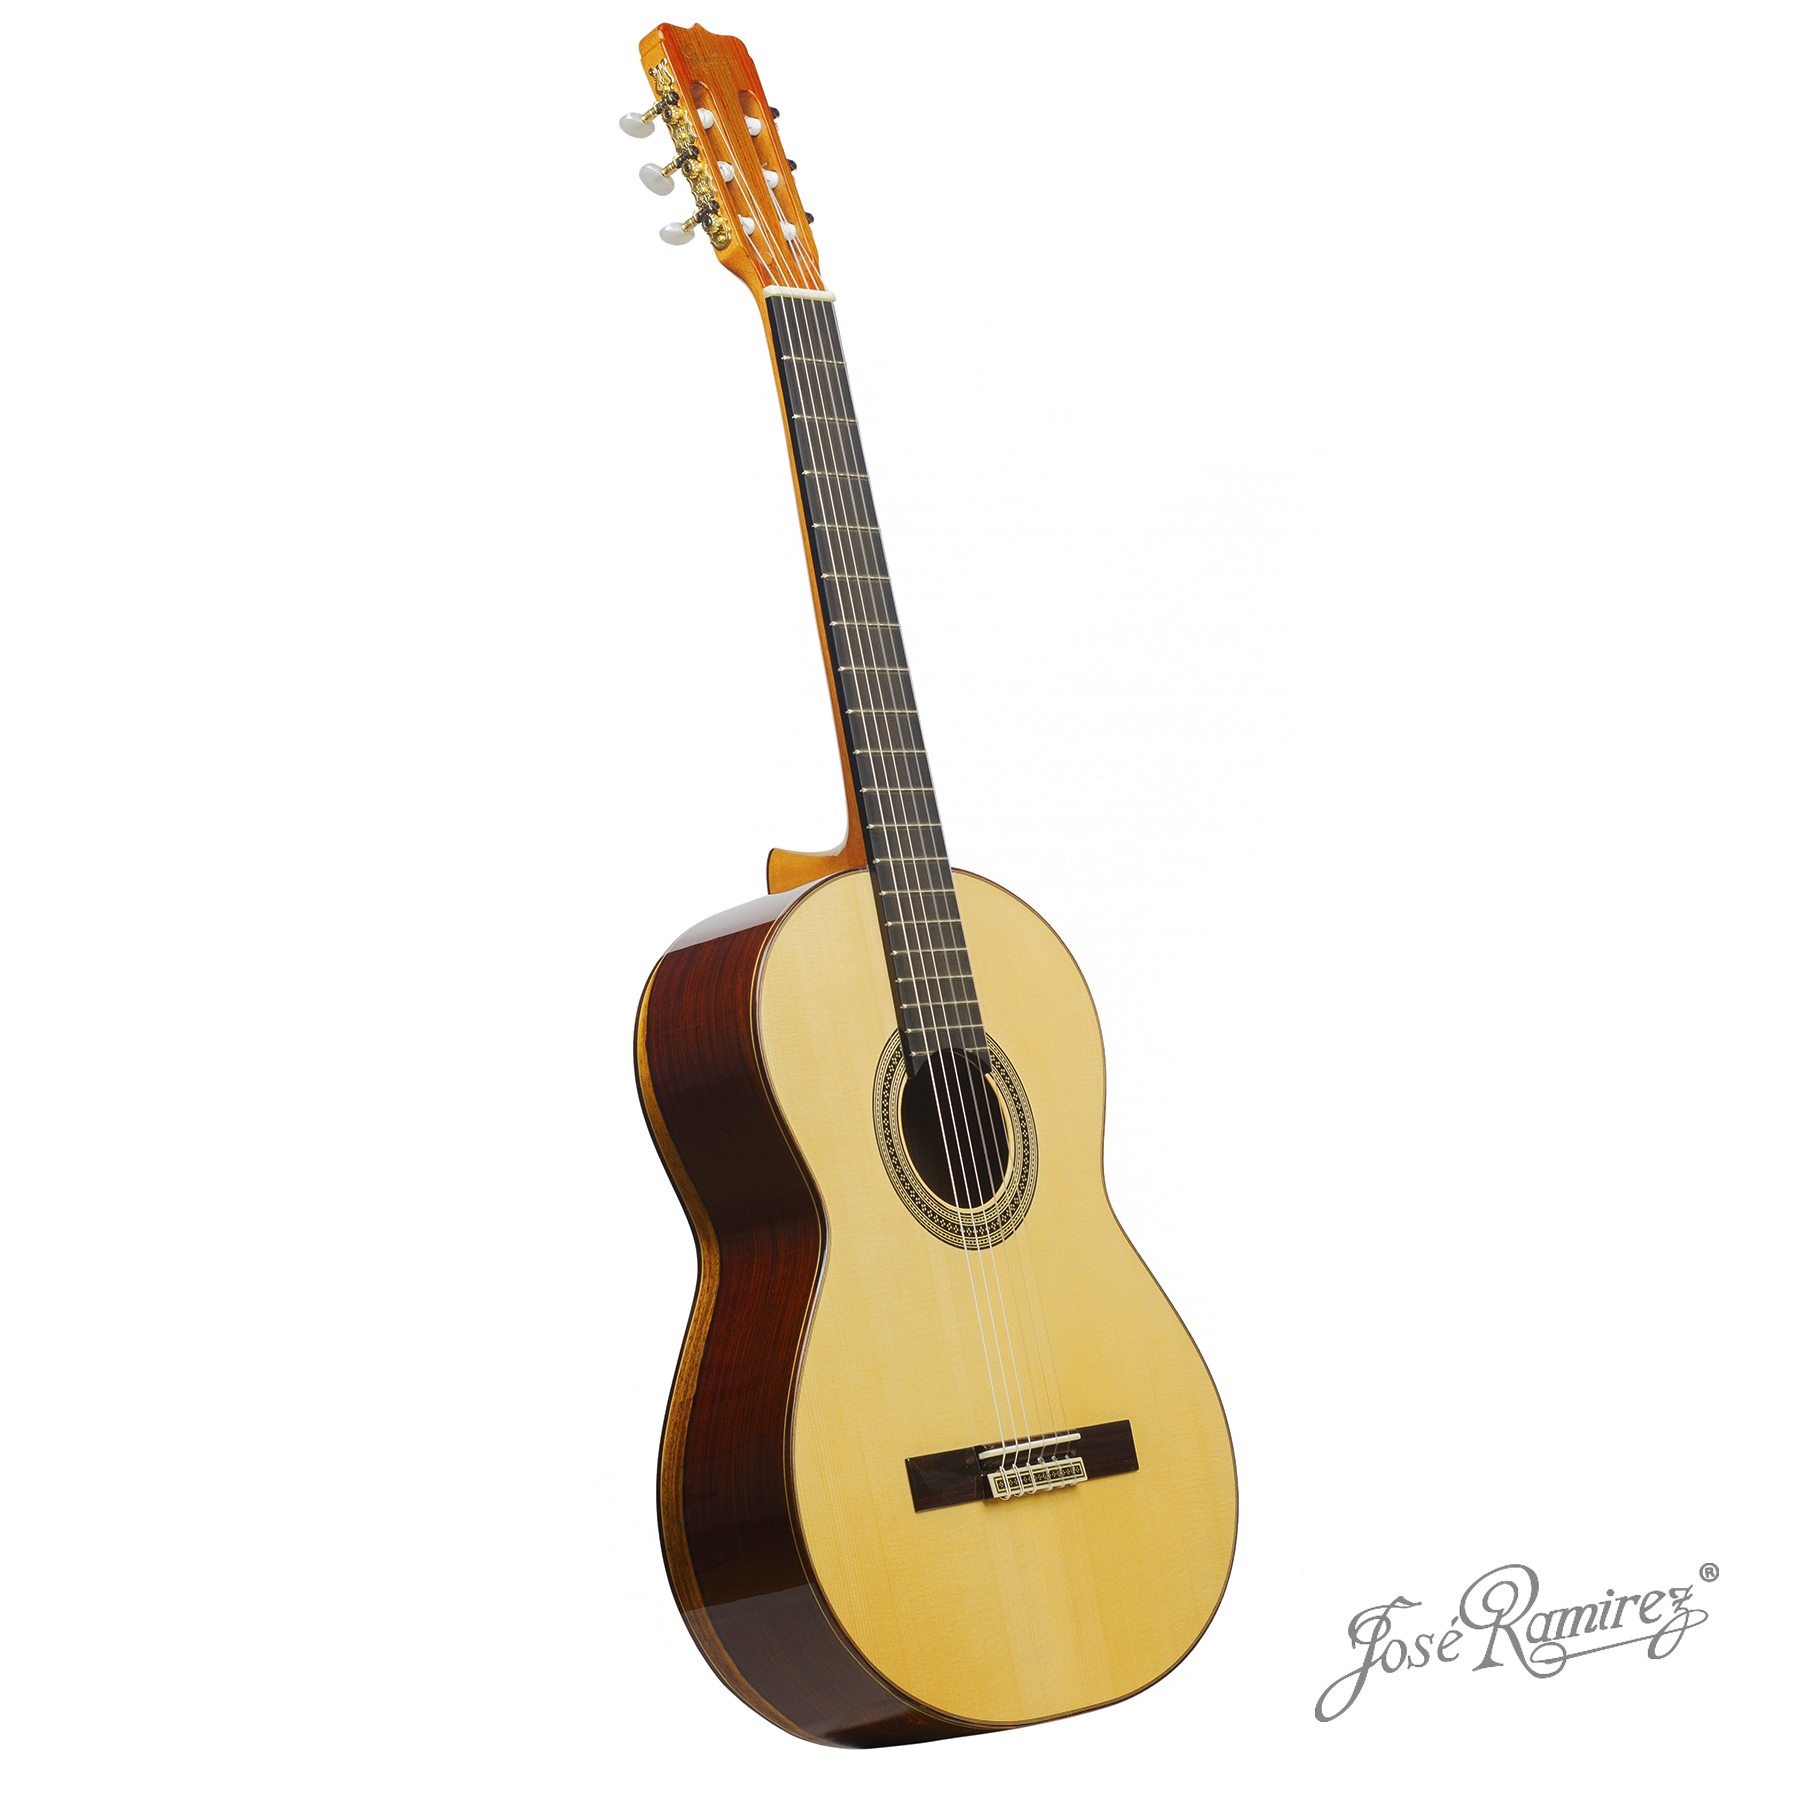 Studio guitar RT1 with spruce top